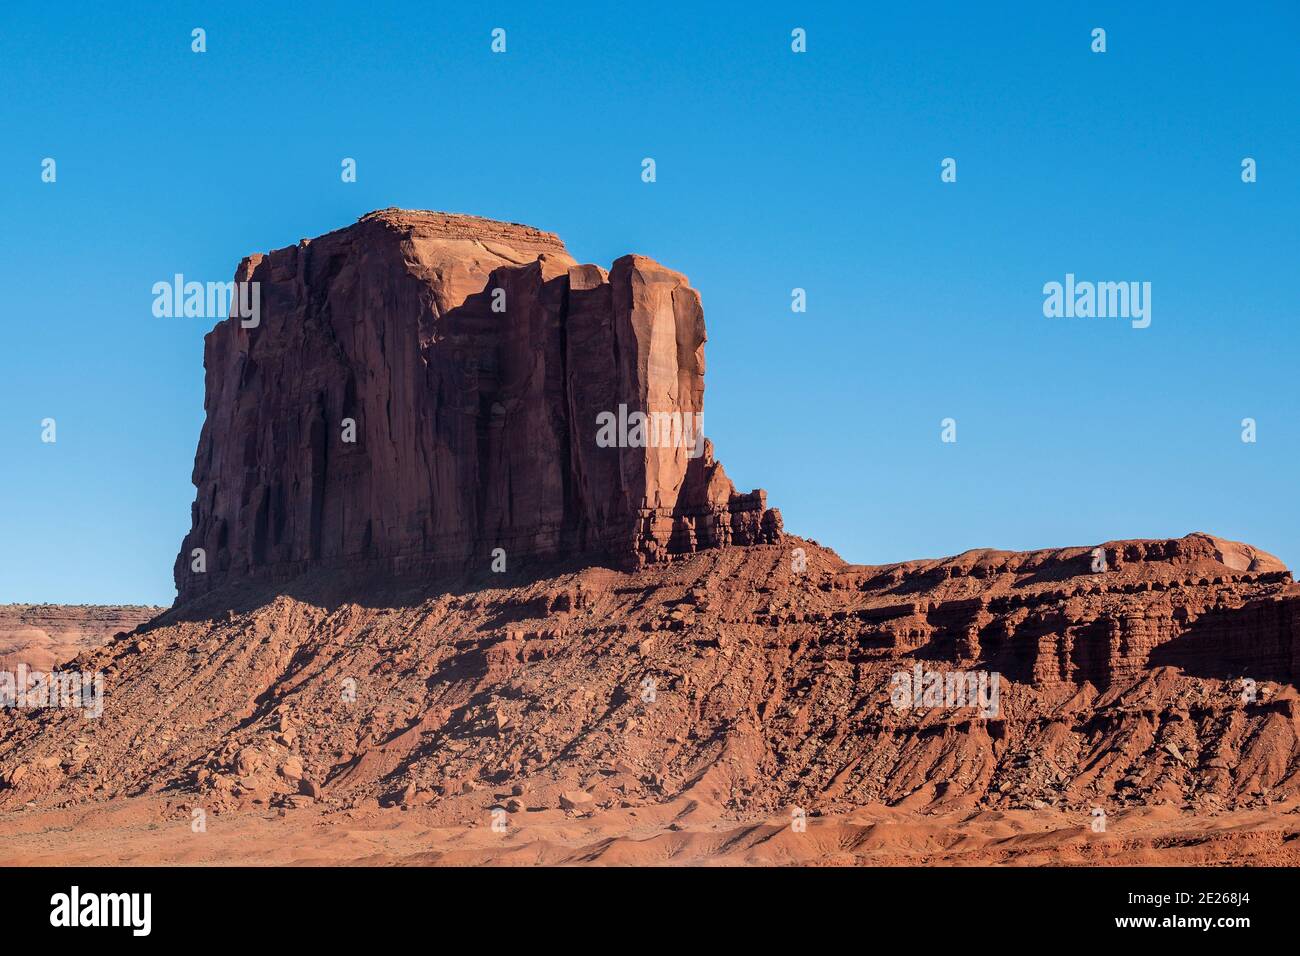 The Elephant Butte rock formation in the Monument Valley Navajo Tribal Park which straddles the Arizona and Utah state line, USA Stock Photo